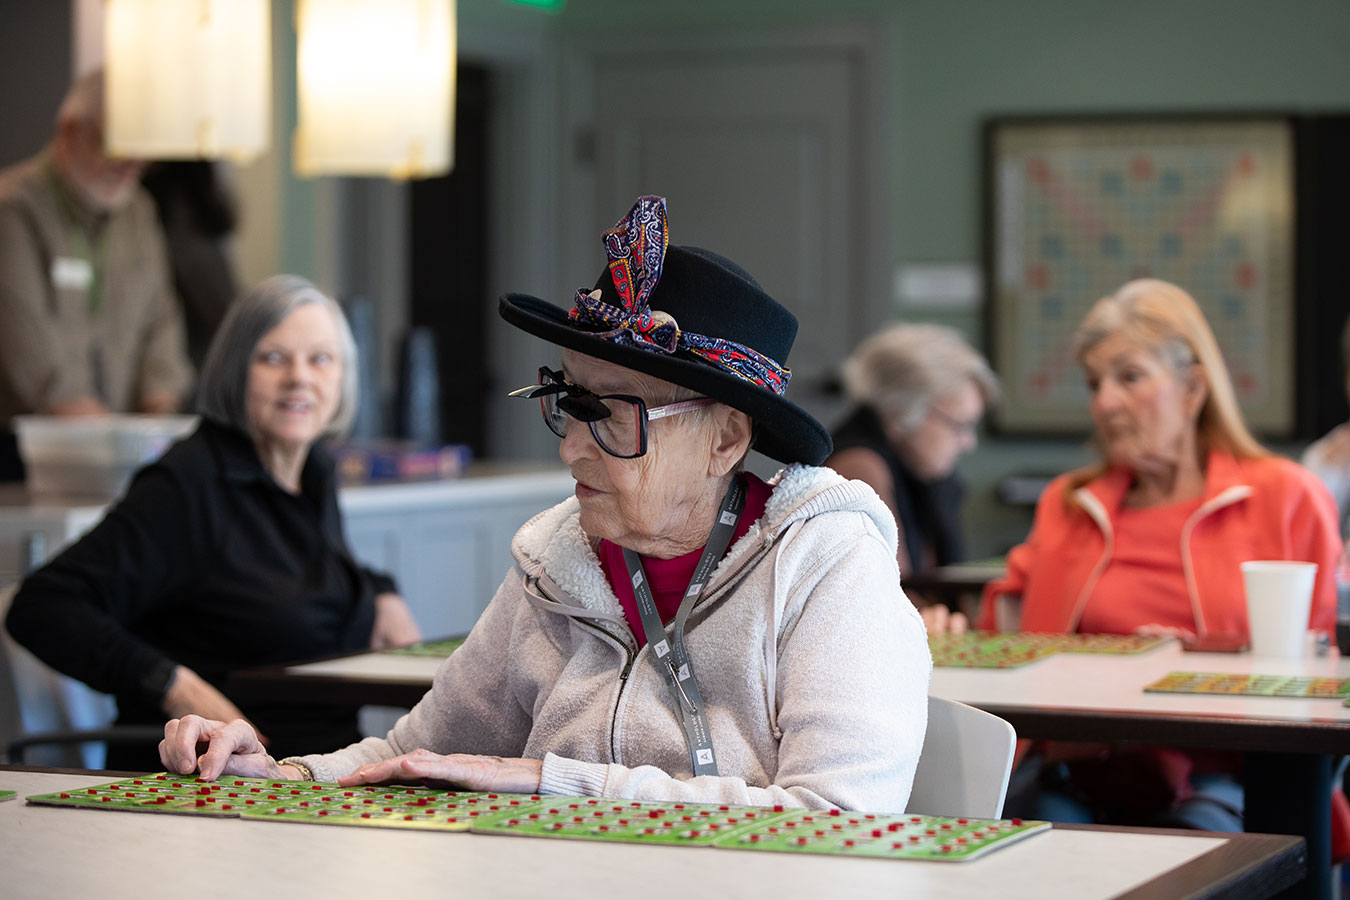 Elderly woman in hat and glasses playing board game at Bingo event, The Plaza at Wildwood senior living.